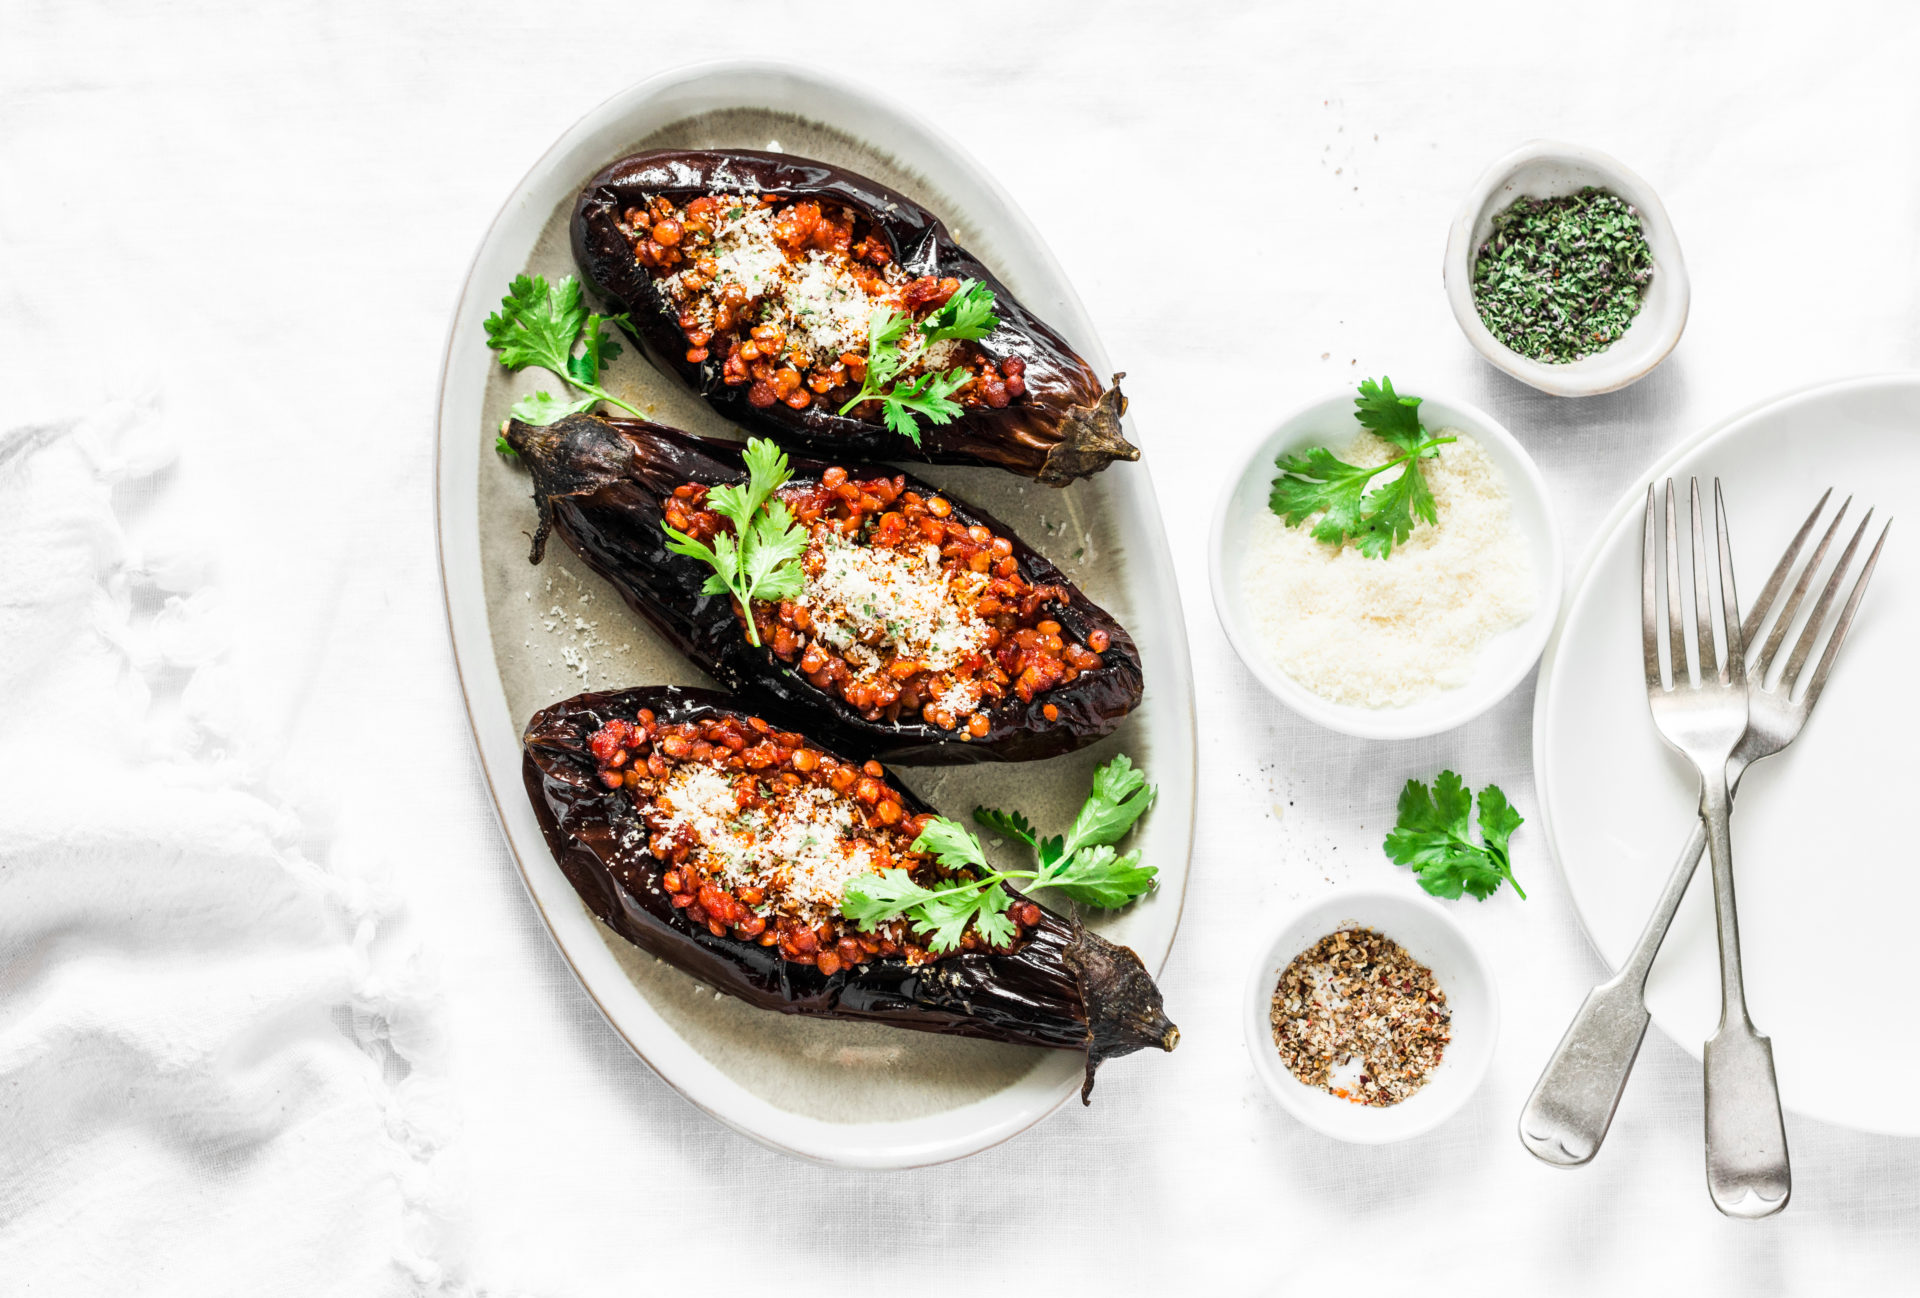 Stuffed lentils roasted eggplant - delicious healthy vegetarian served lunch  table. On a light background, top view